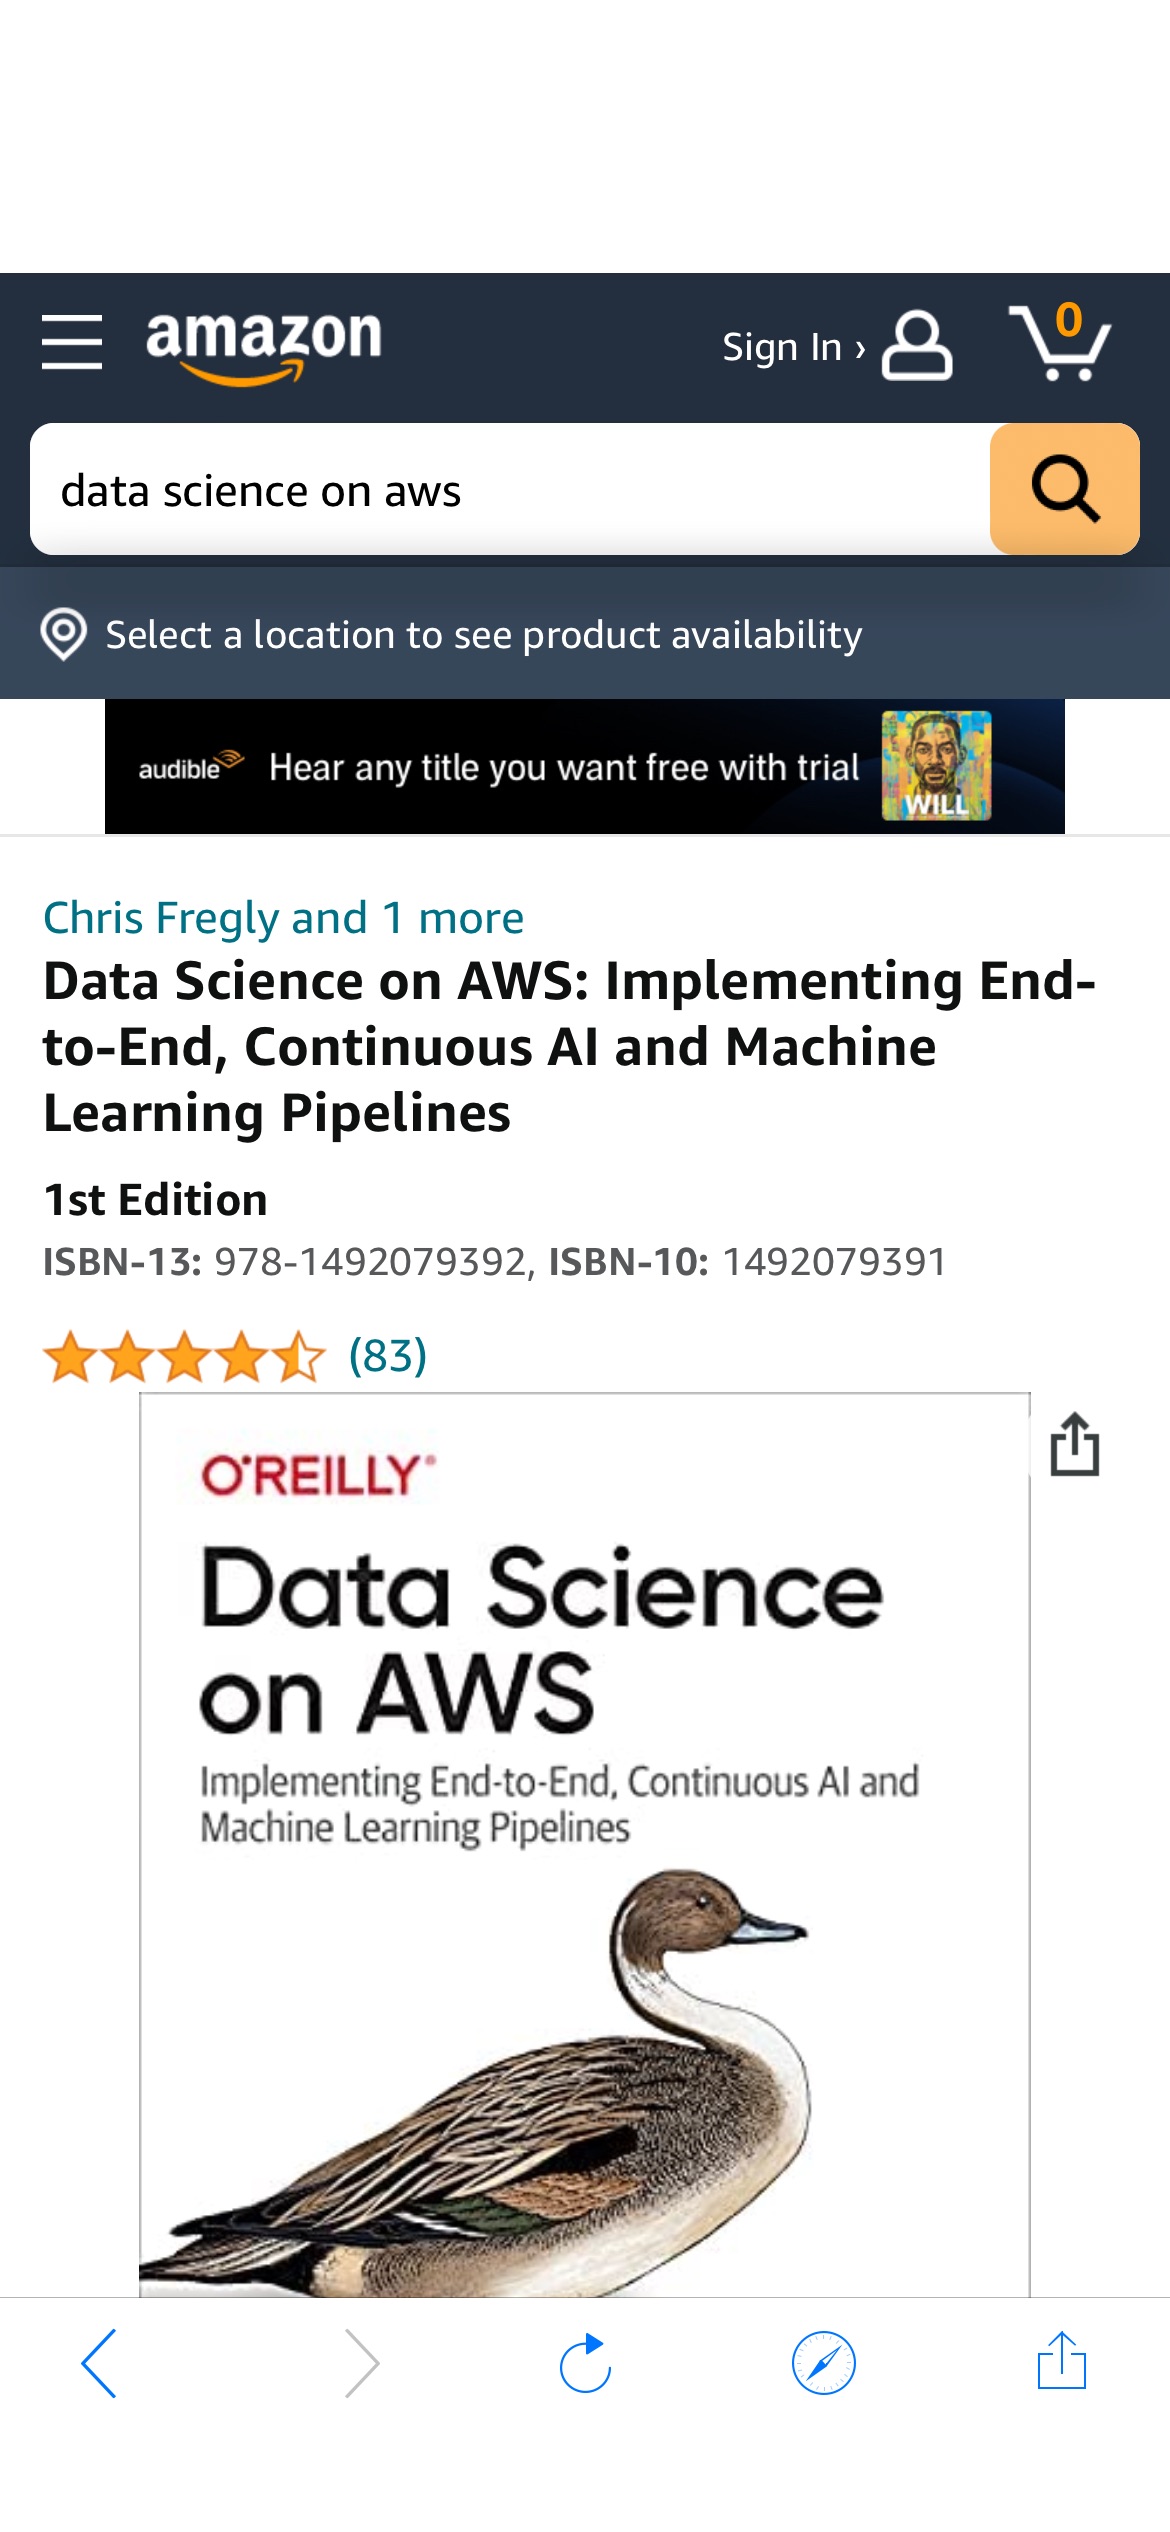 Data Science on AWS: Implementing End-to-End, Continuous AI and Machine Learning Pipelines: Fregly, Chris, Barth 中文咋翻译来的？